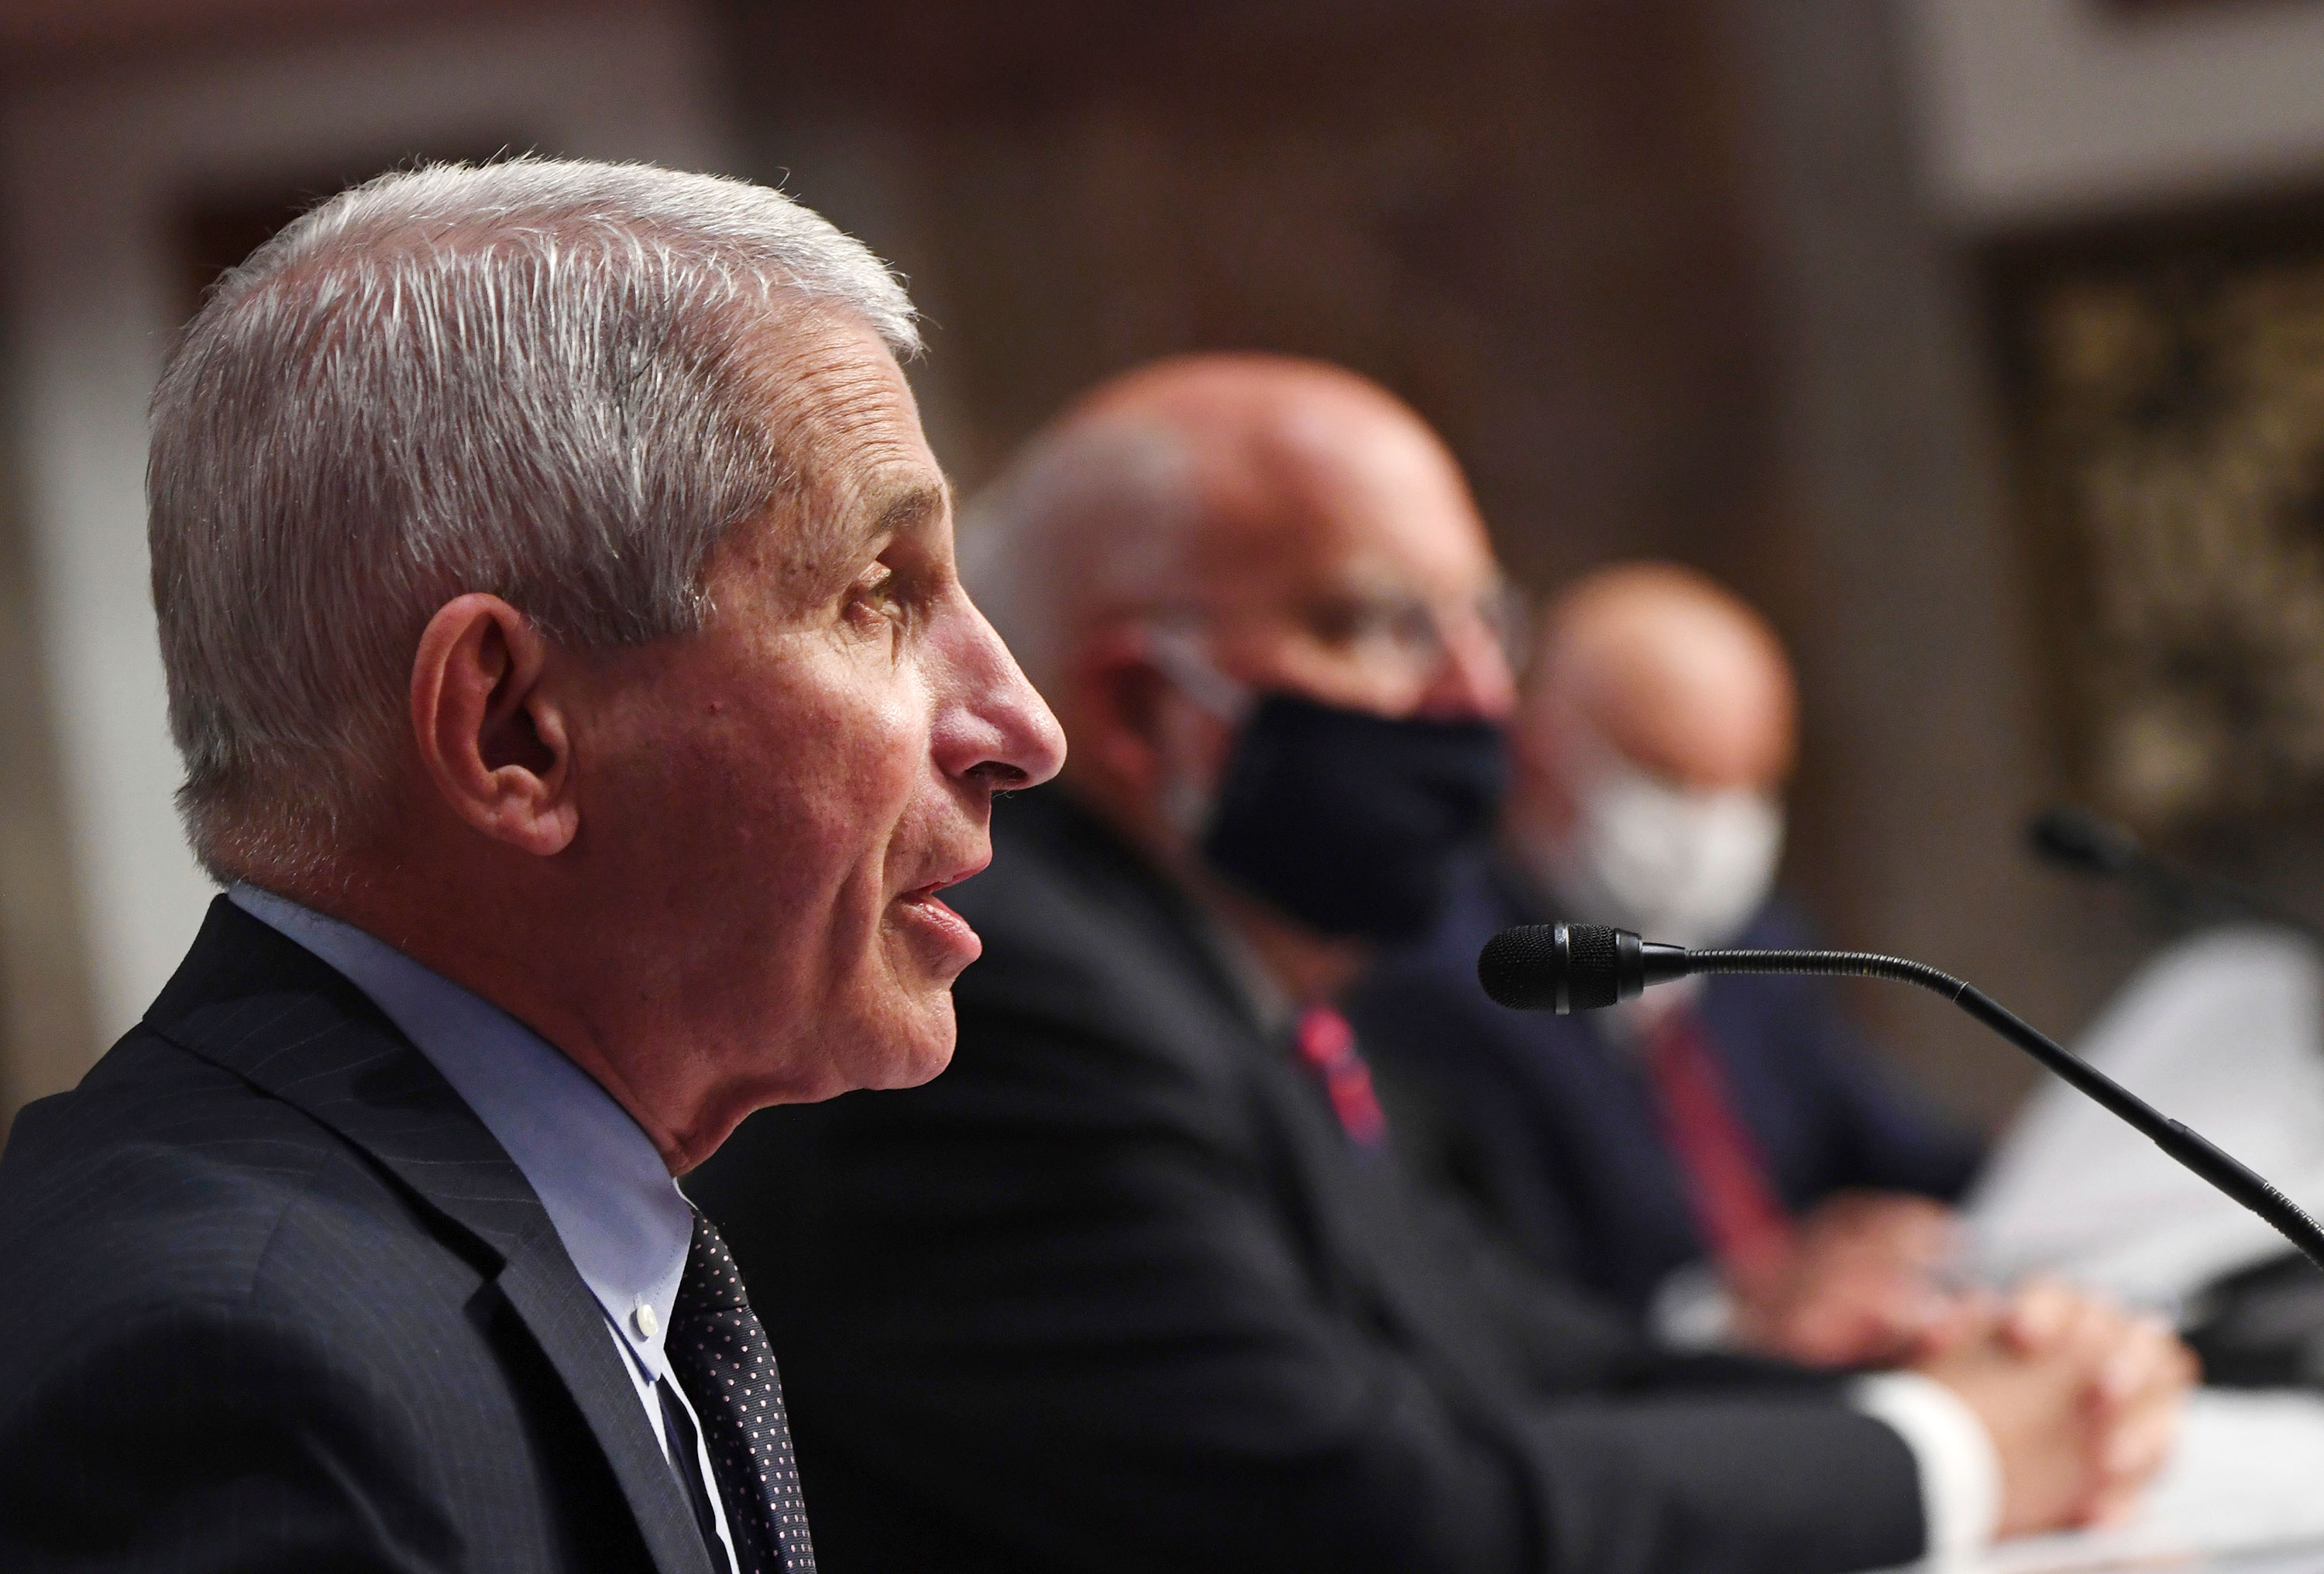 Dr. Anthony Fauci, director of the National Institute for Allergy and Infectious Diseases, testifies before a Senate Health, Education, Labor and Pensions Committee hearing on June 30 in Washington, DC.